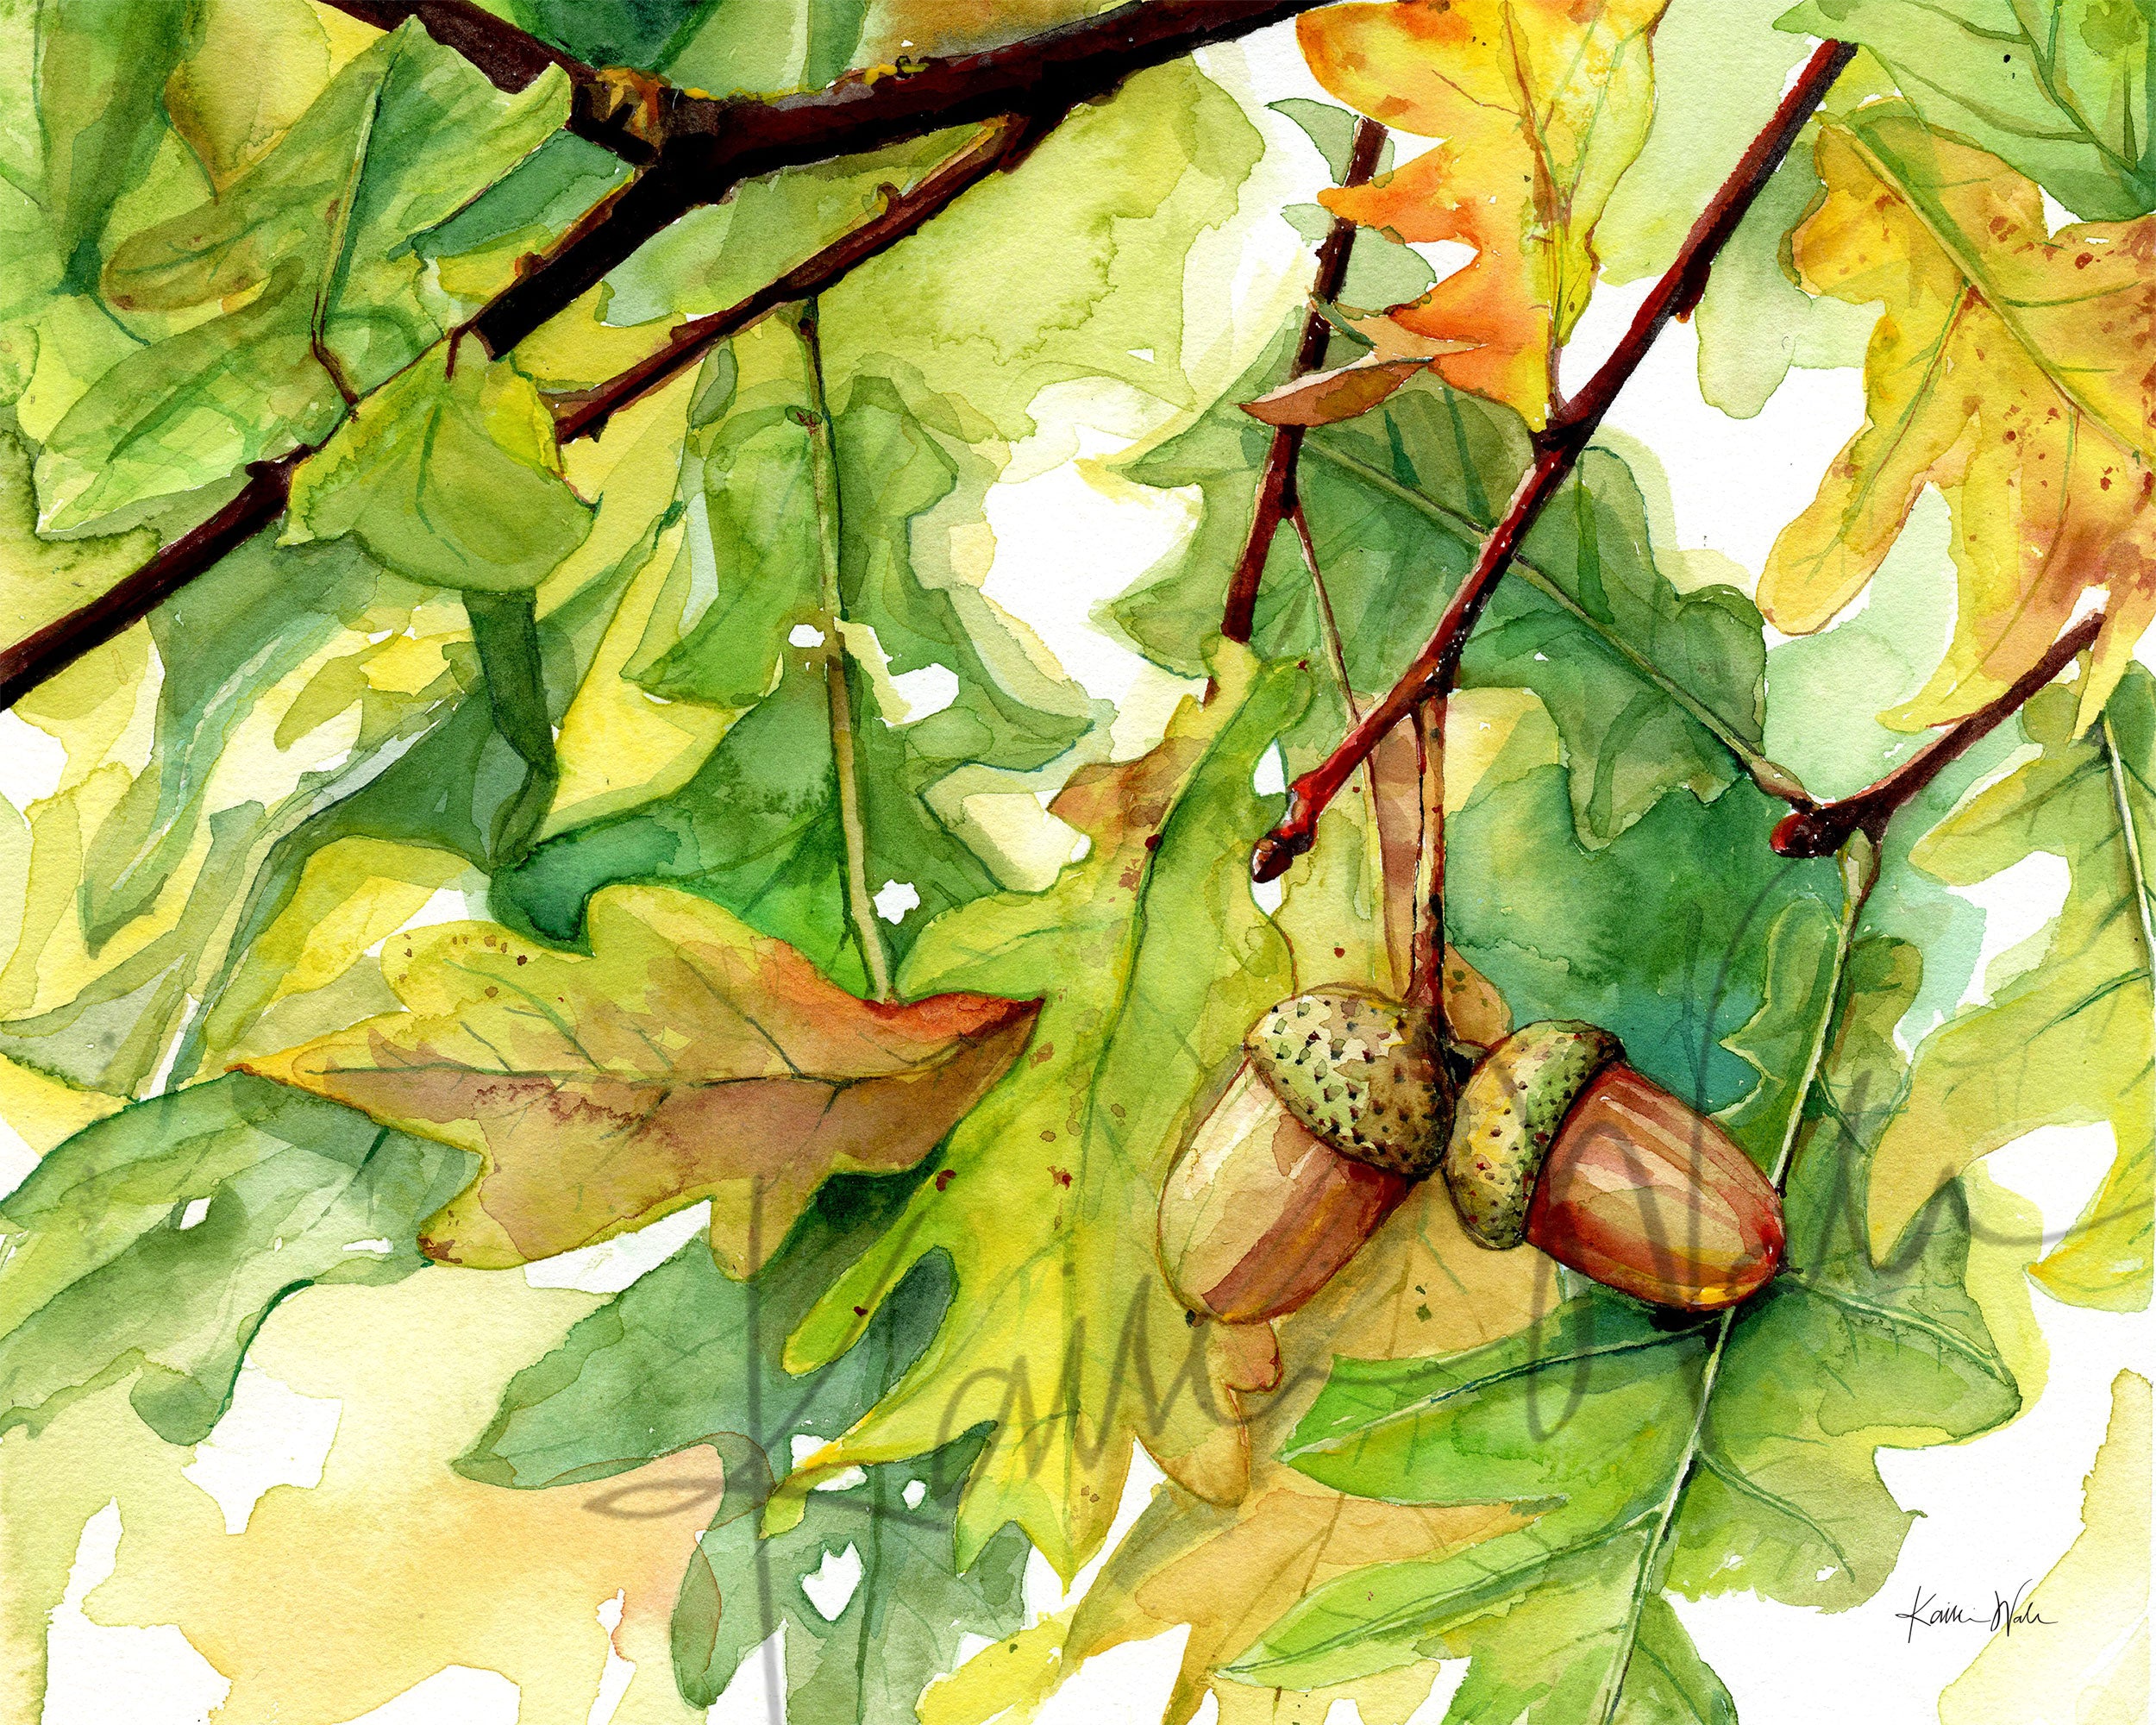 Unframed watercolor painting of autumn leaves and acorns hanging from an oak tree.